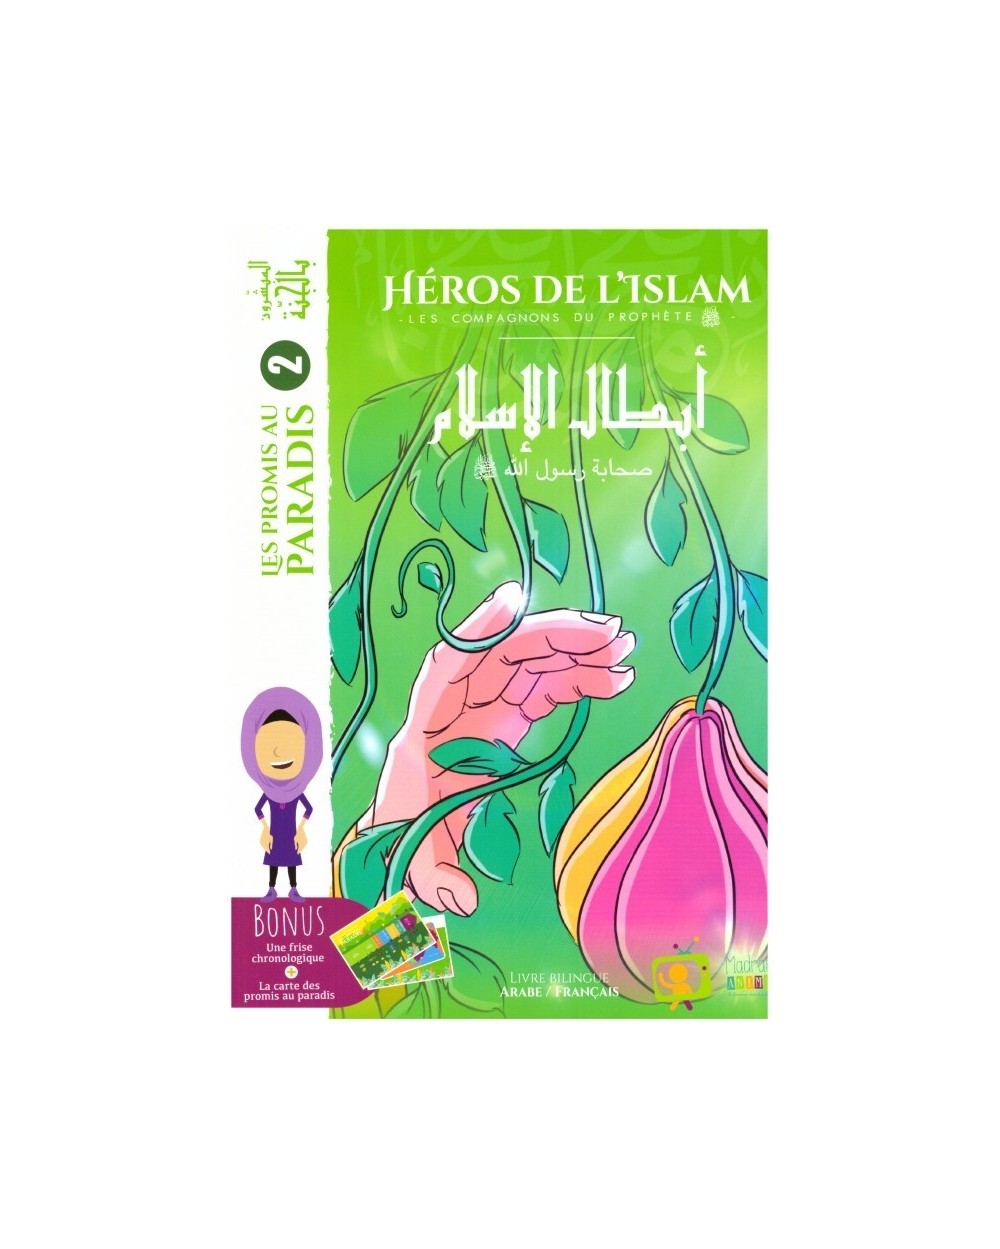 The Promised In Paradise Collection The Heroes of Islam: The Companions